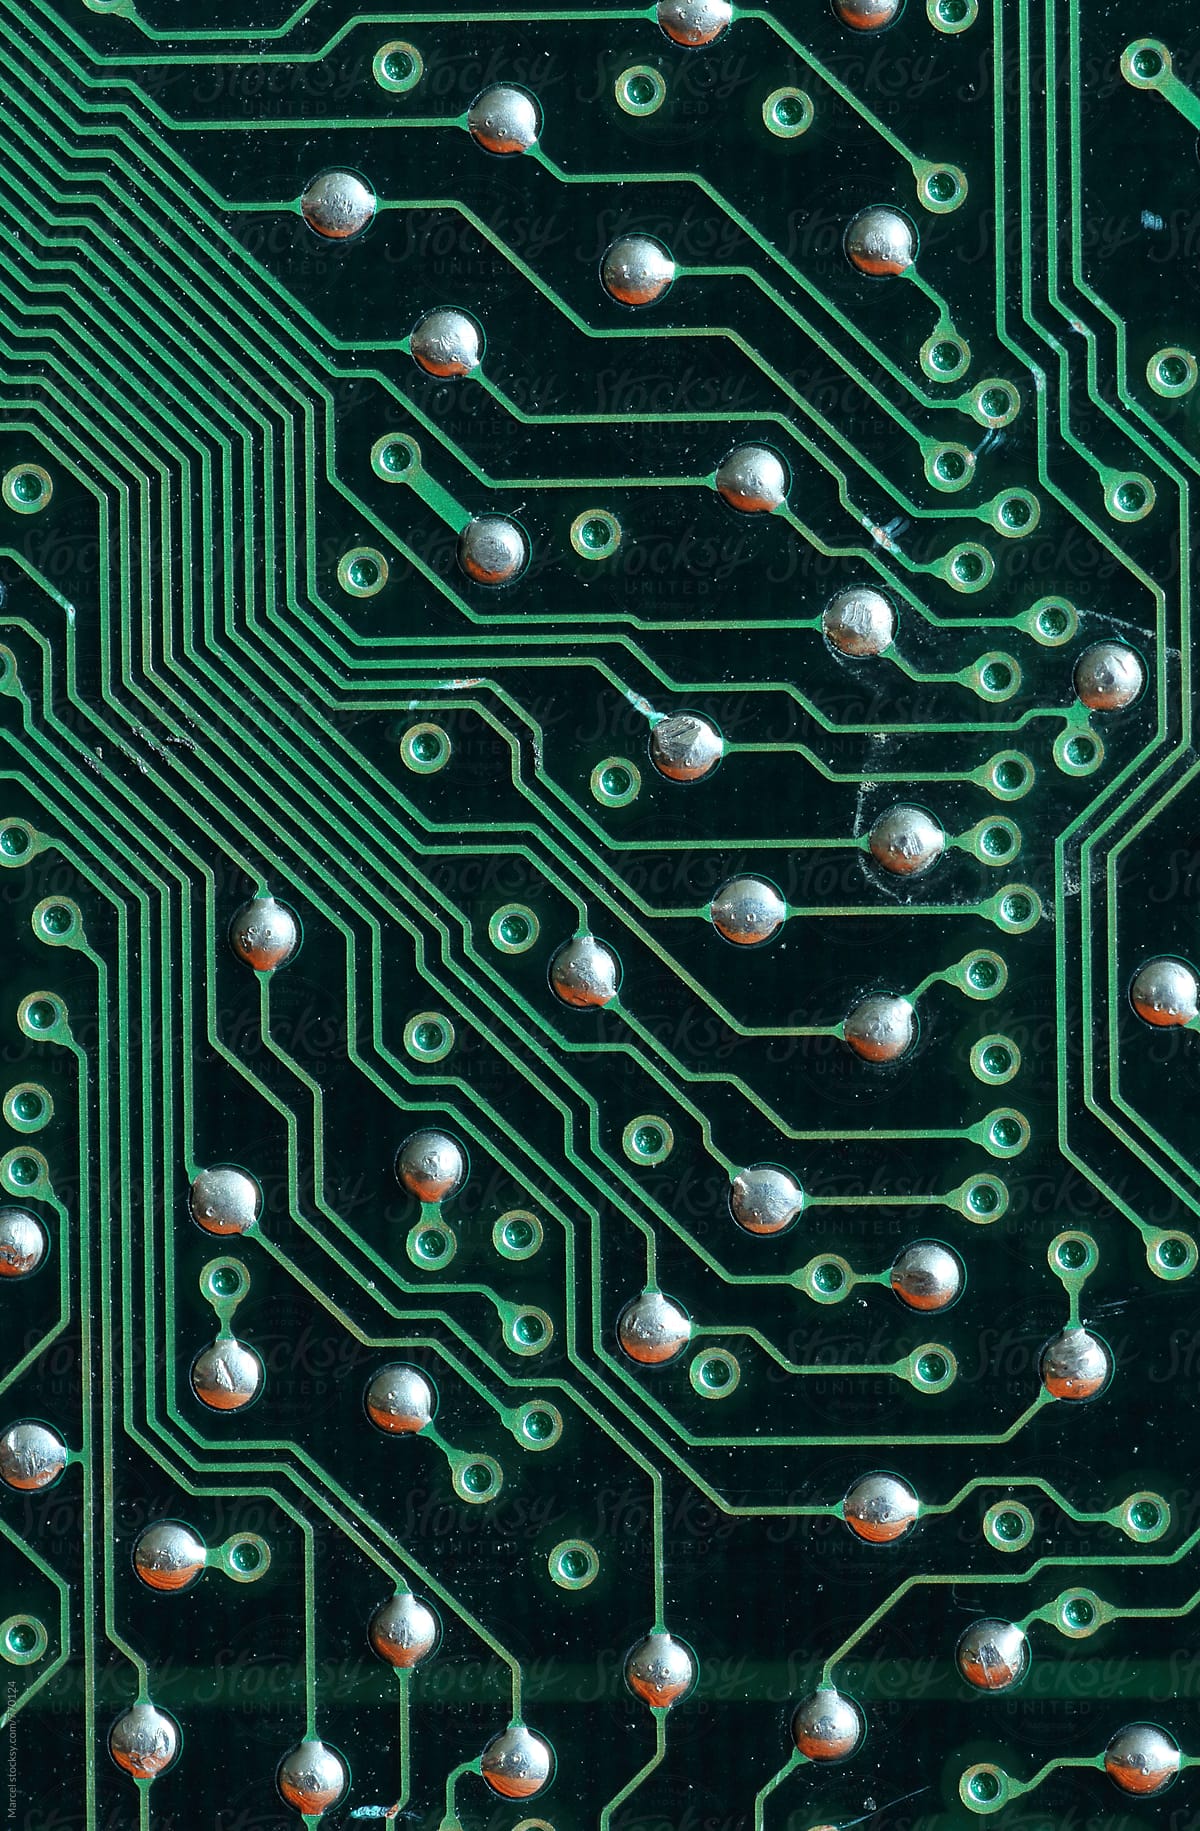 Macro of the backside of a printed circuit board of a computer